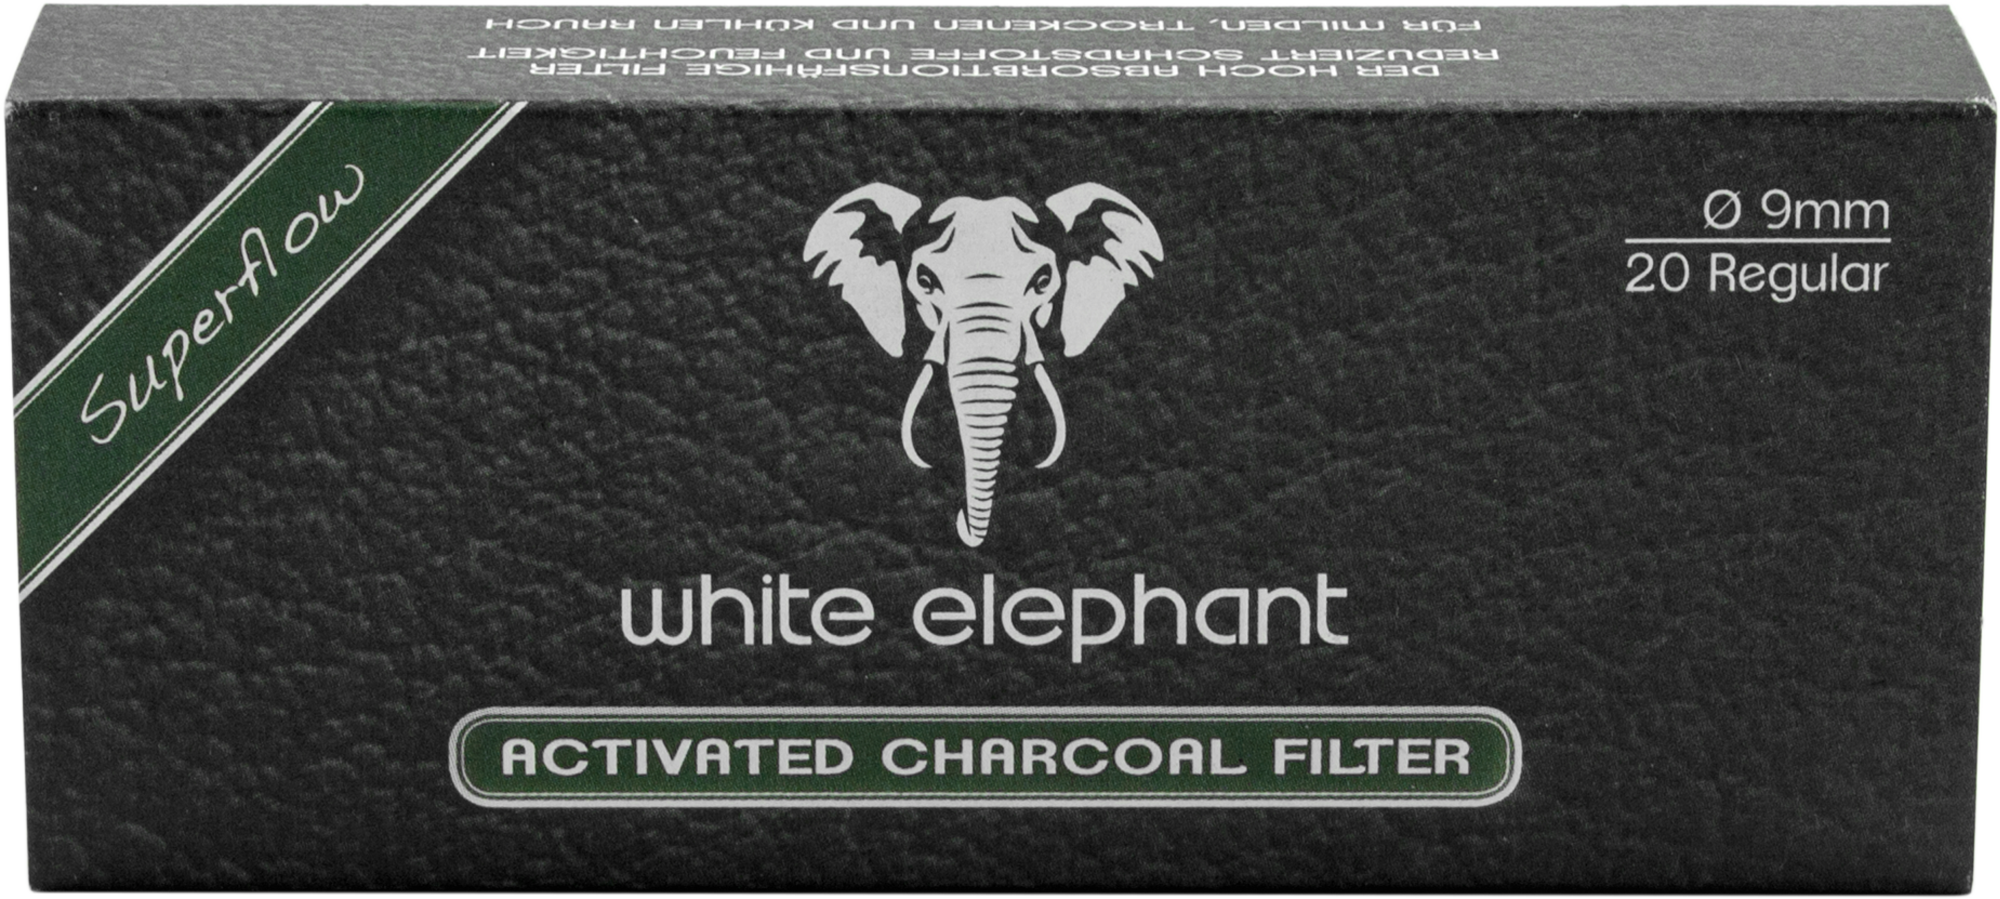 White Elephant 20 Activated Charcoal Filter 9mm (20x)